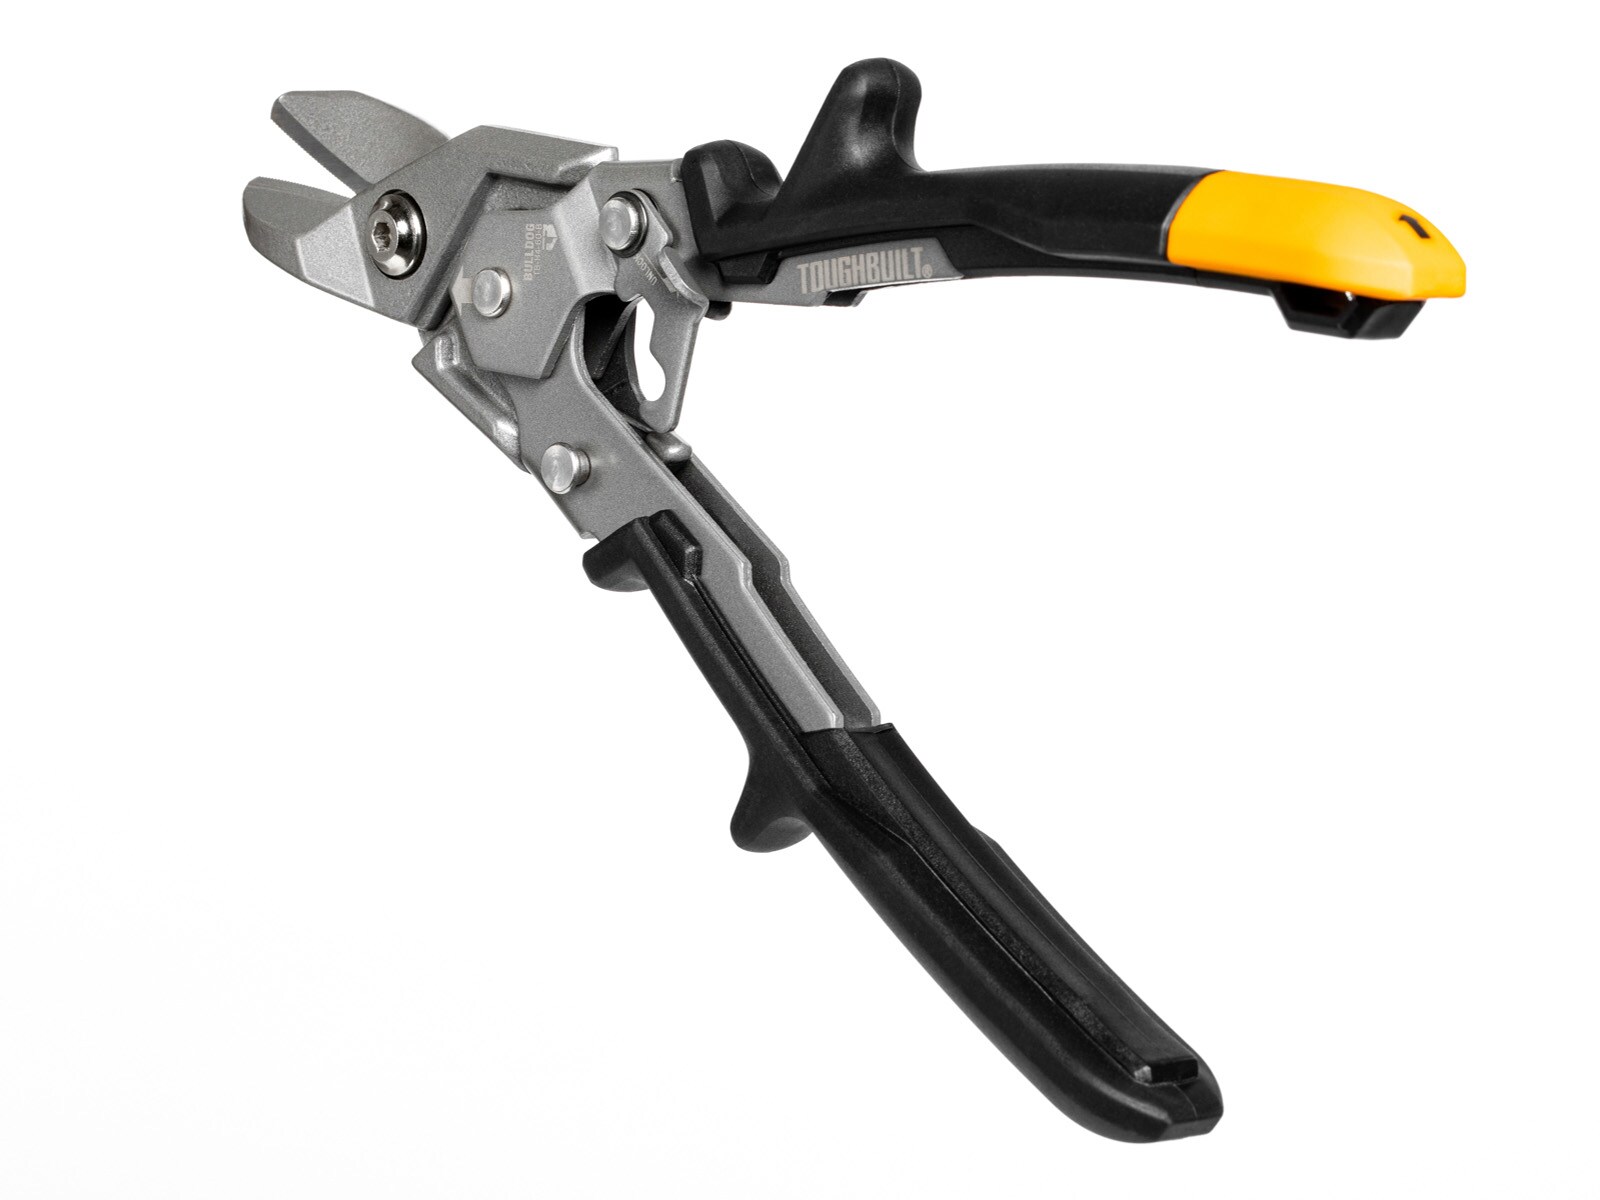 TOUGHBUILT Bulldog Aviation Alloy Steel Straight Cut Snips In The Tin Snips  Department At